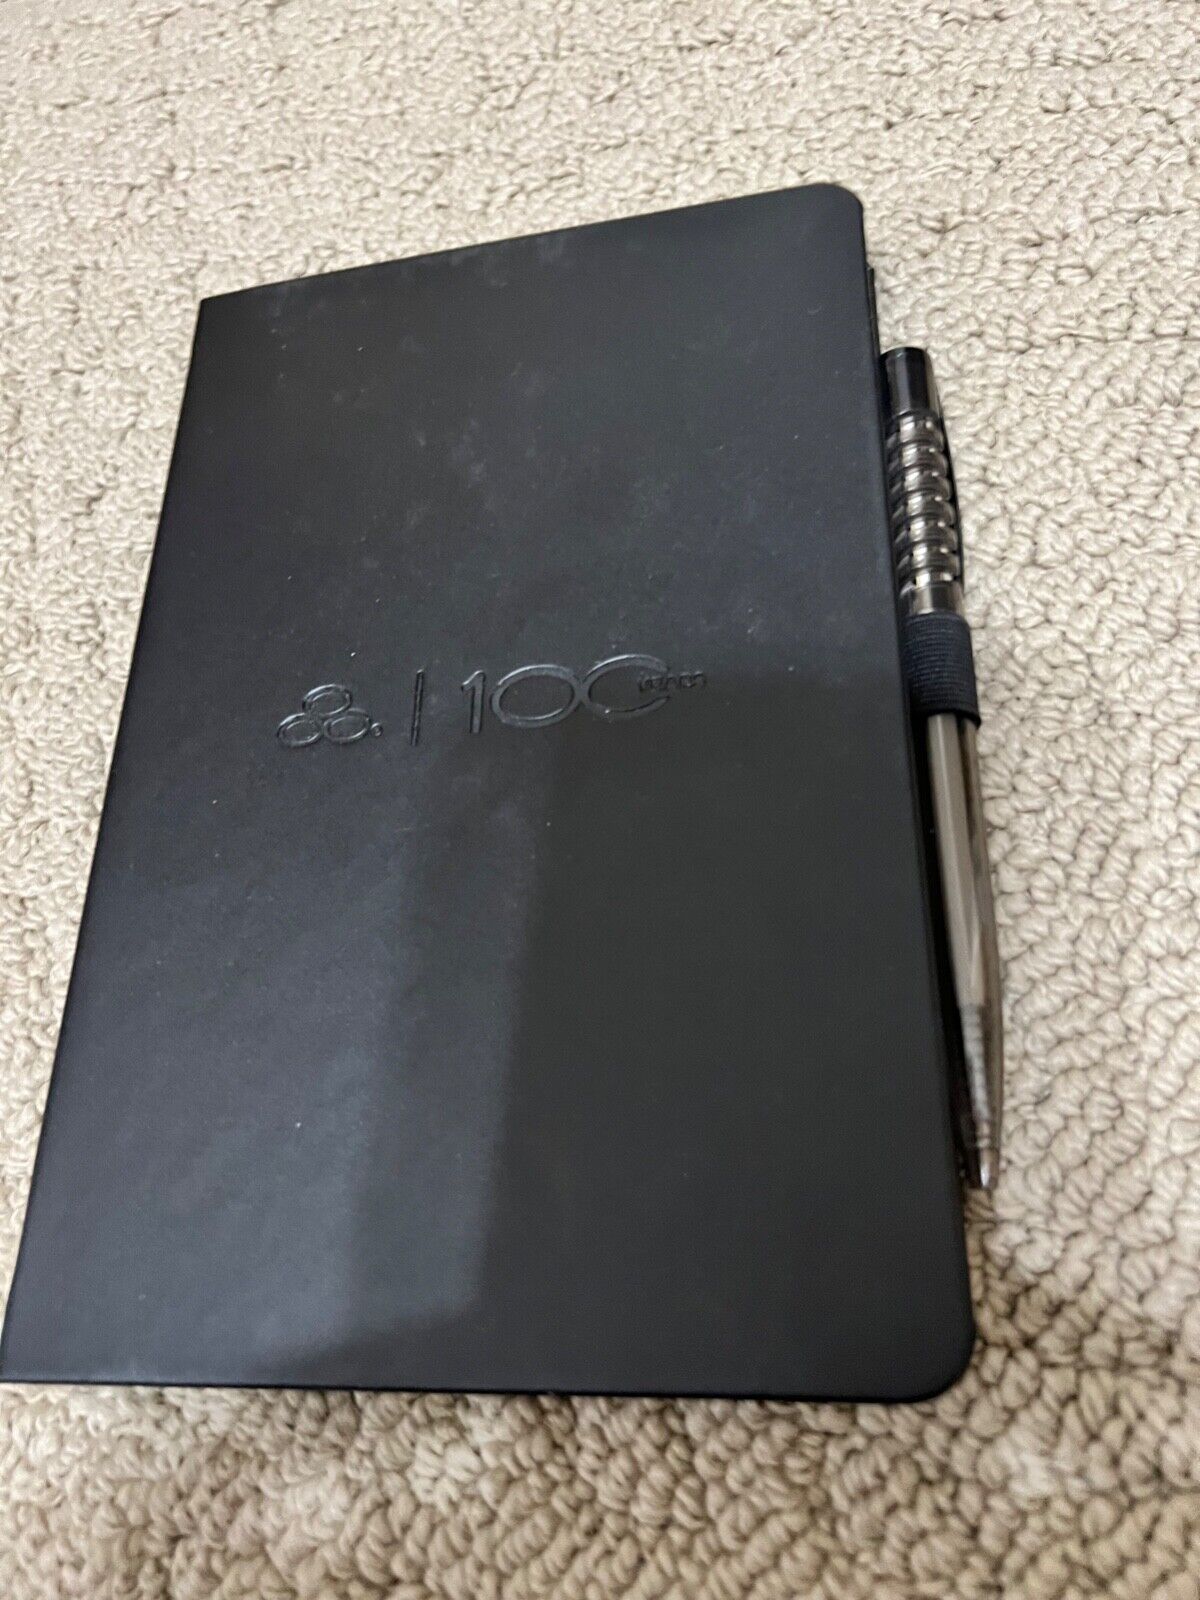 State Farm Insurance 100th Anniversary unused journal notebook with pen